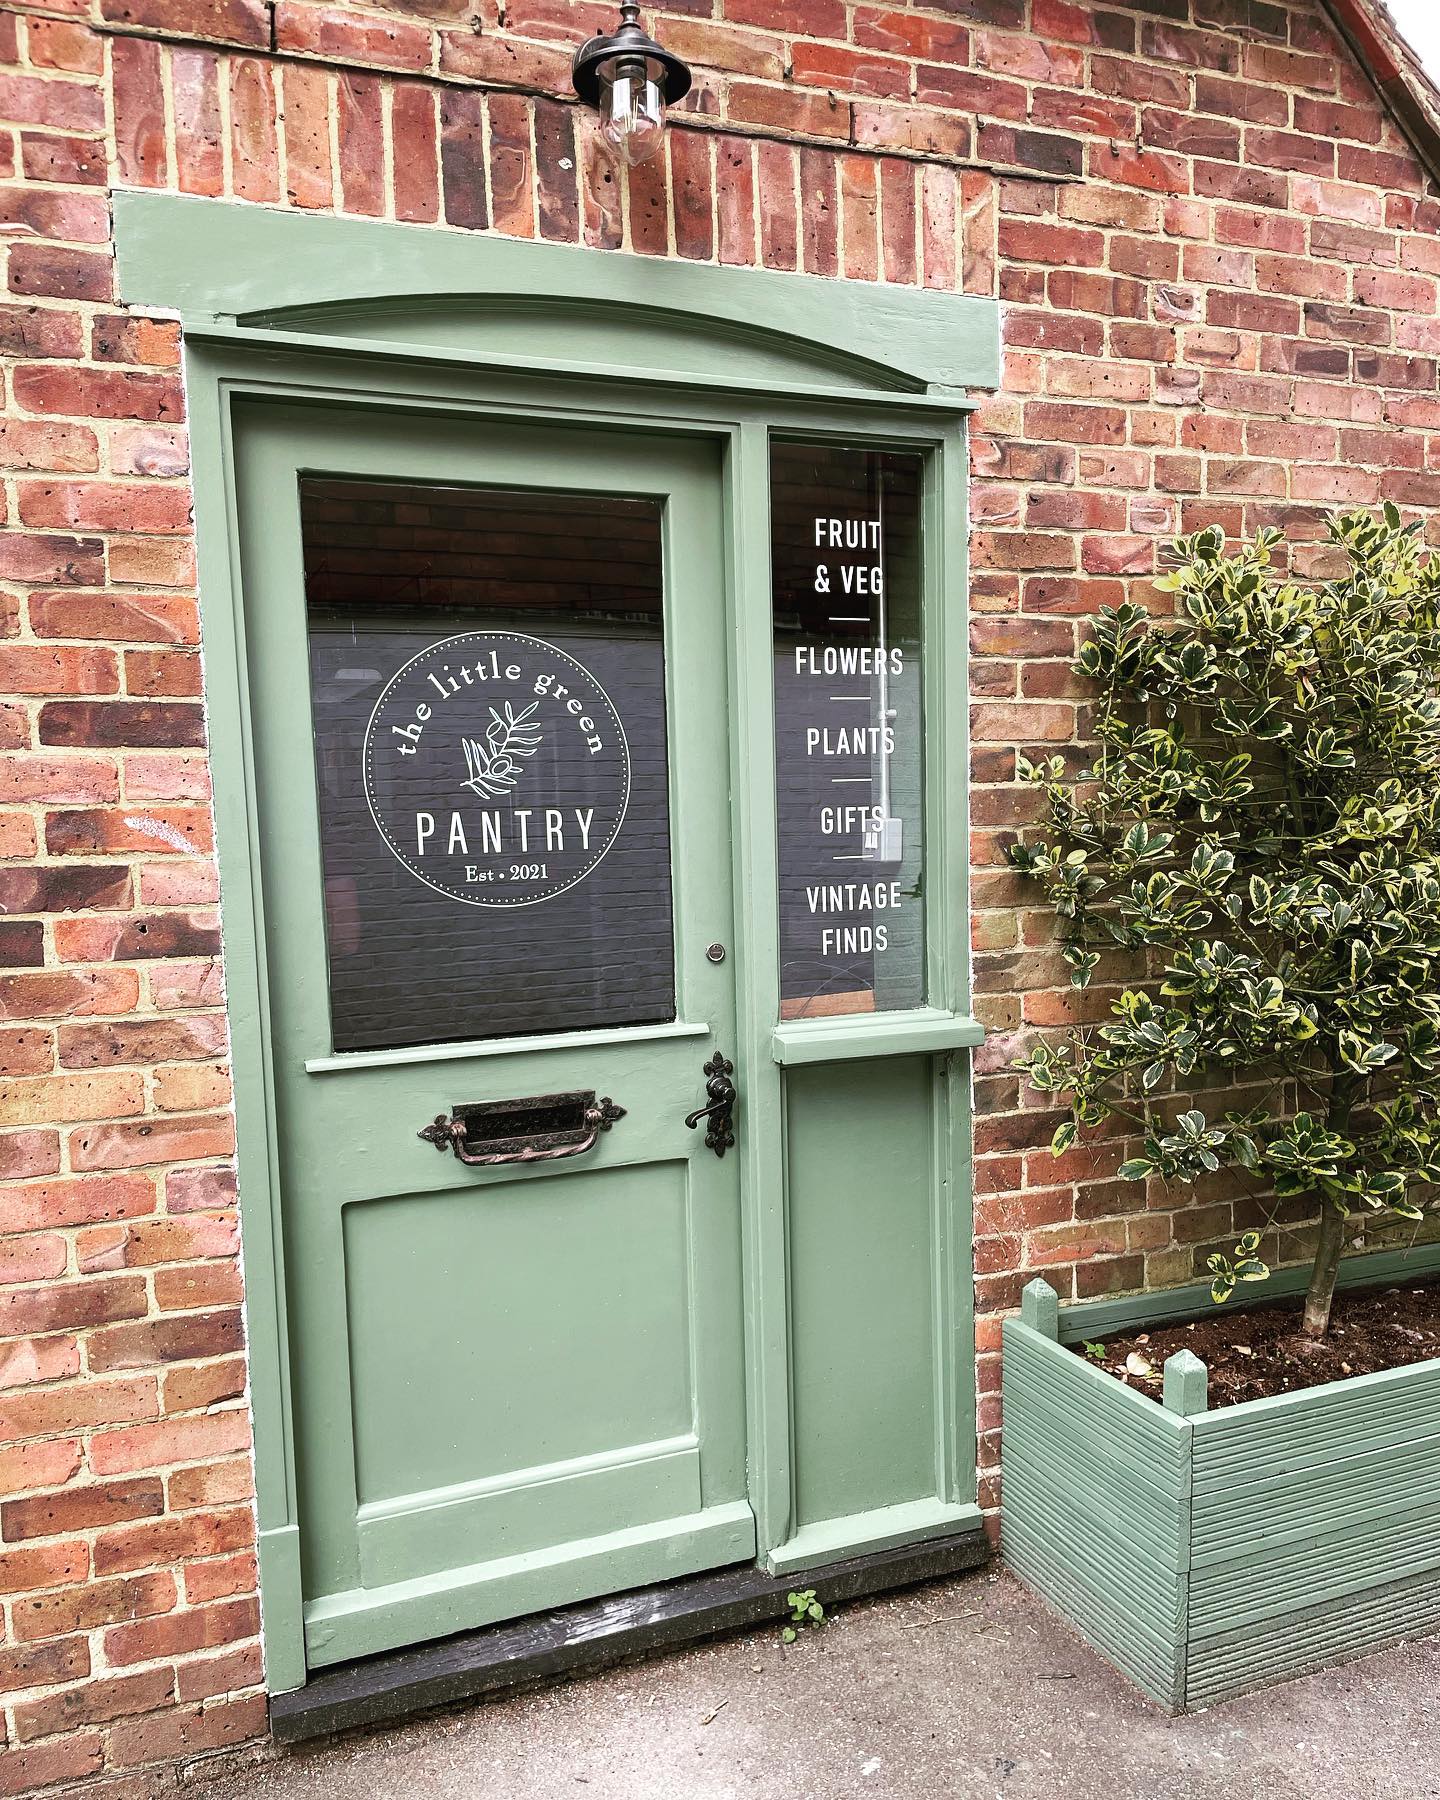 The Little Green Pantry